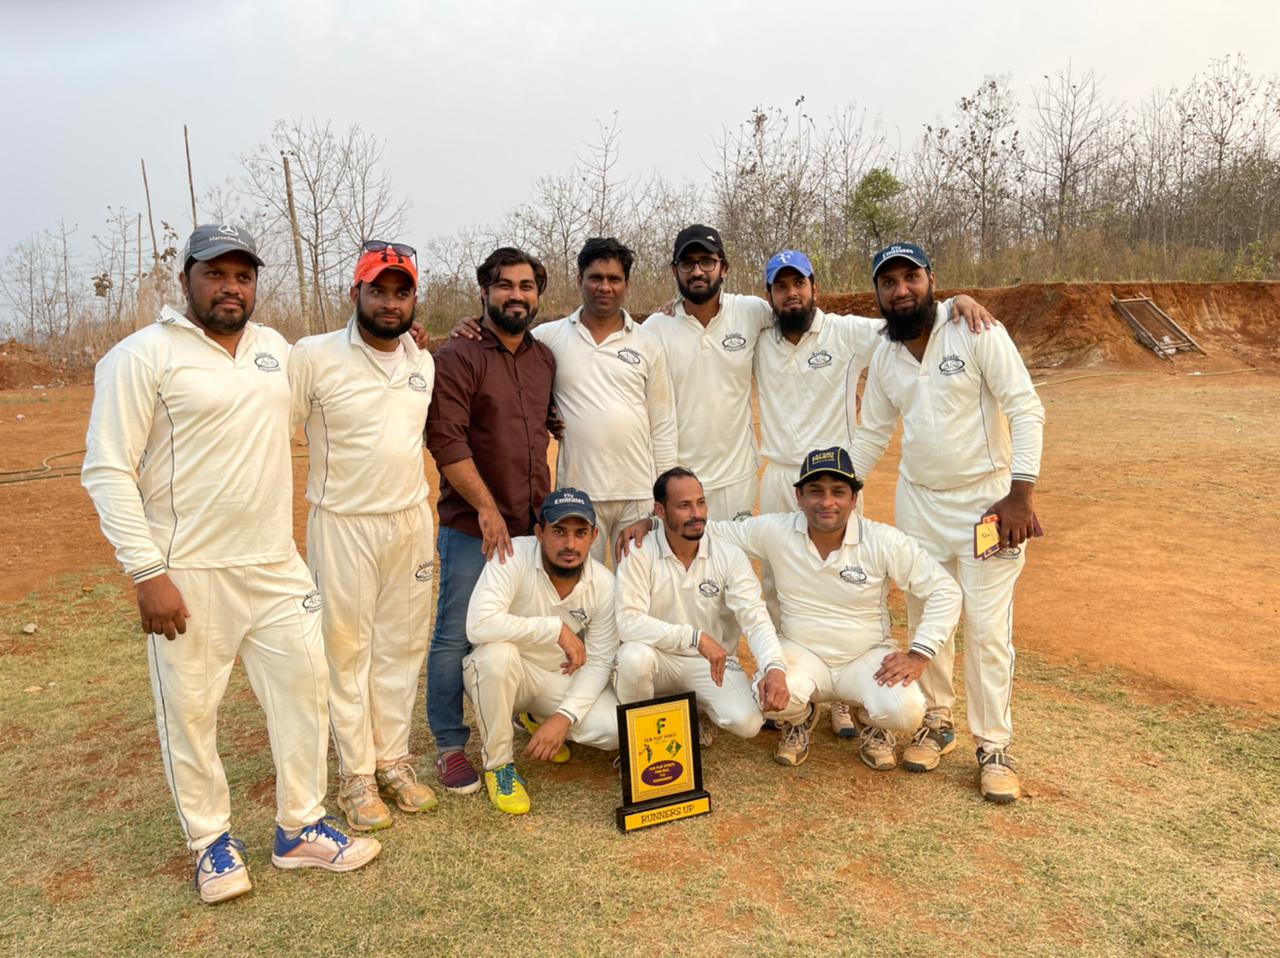 Hell of a Cricket Team: Asiatic Engineering Team